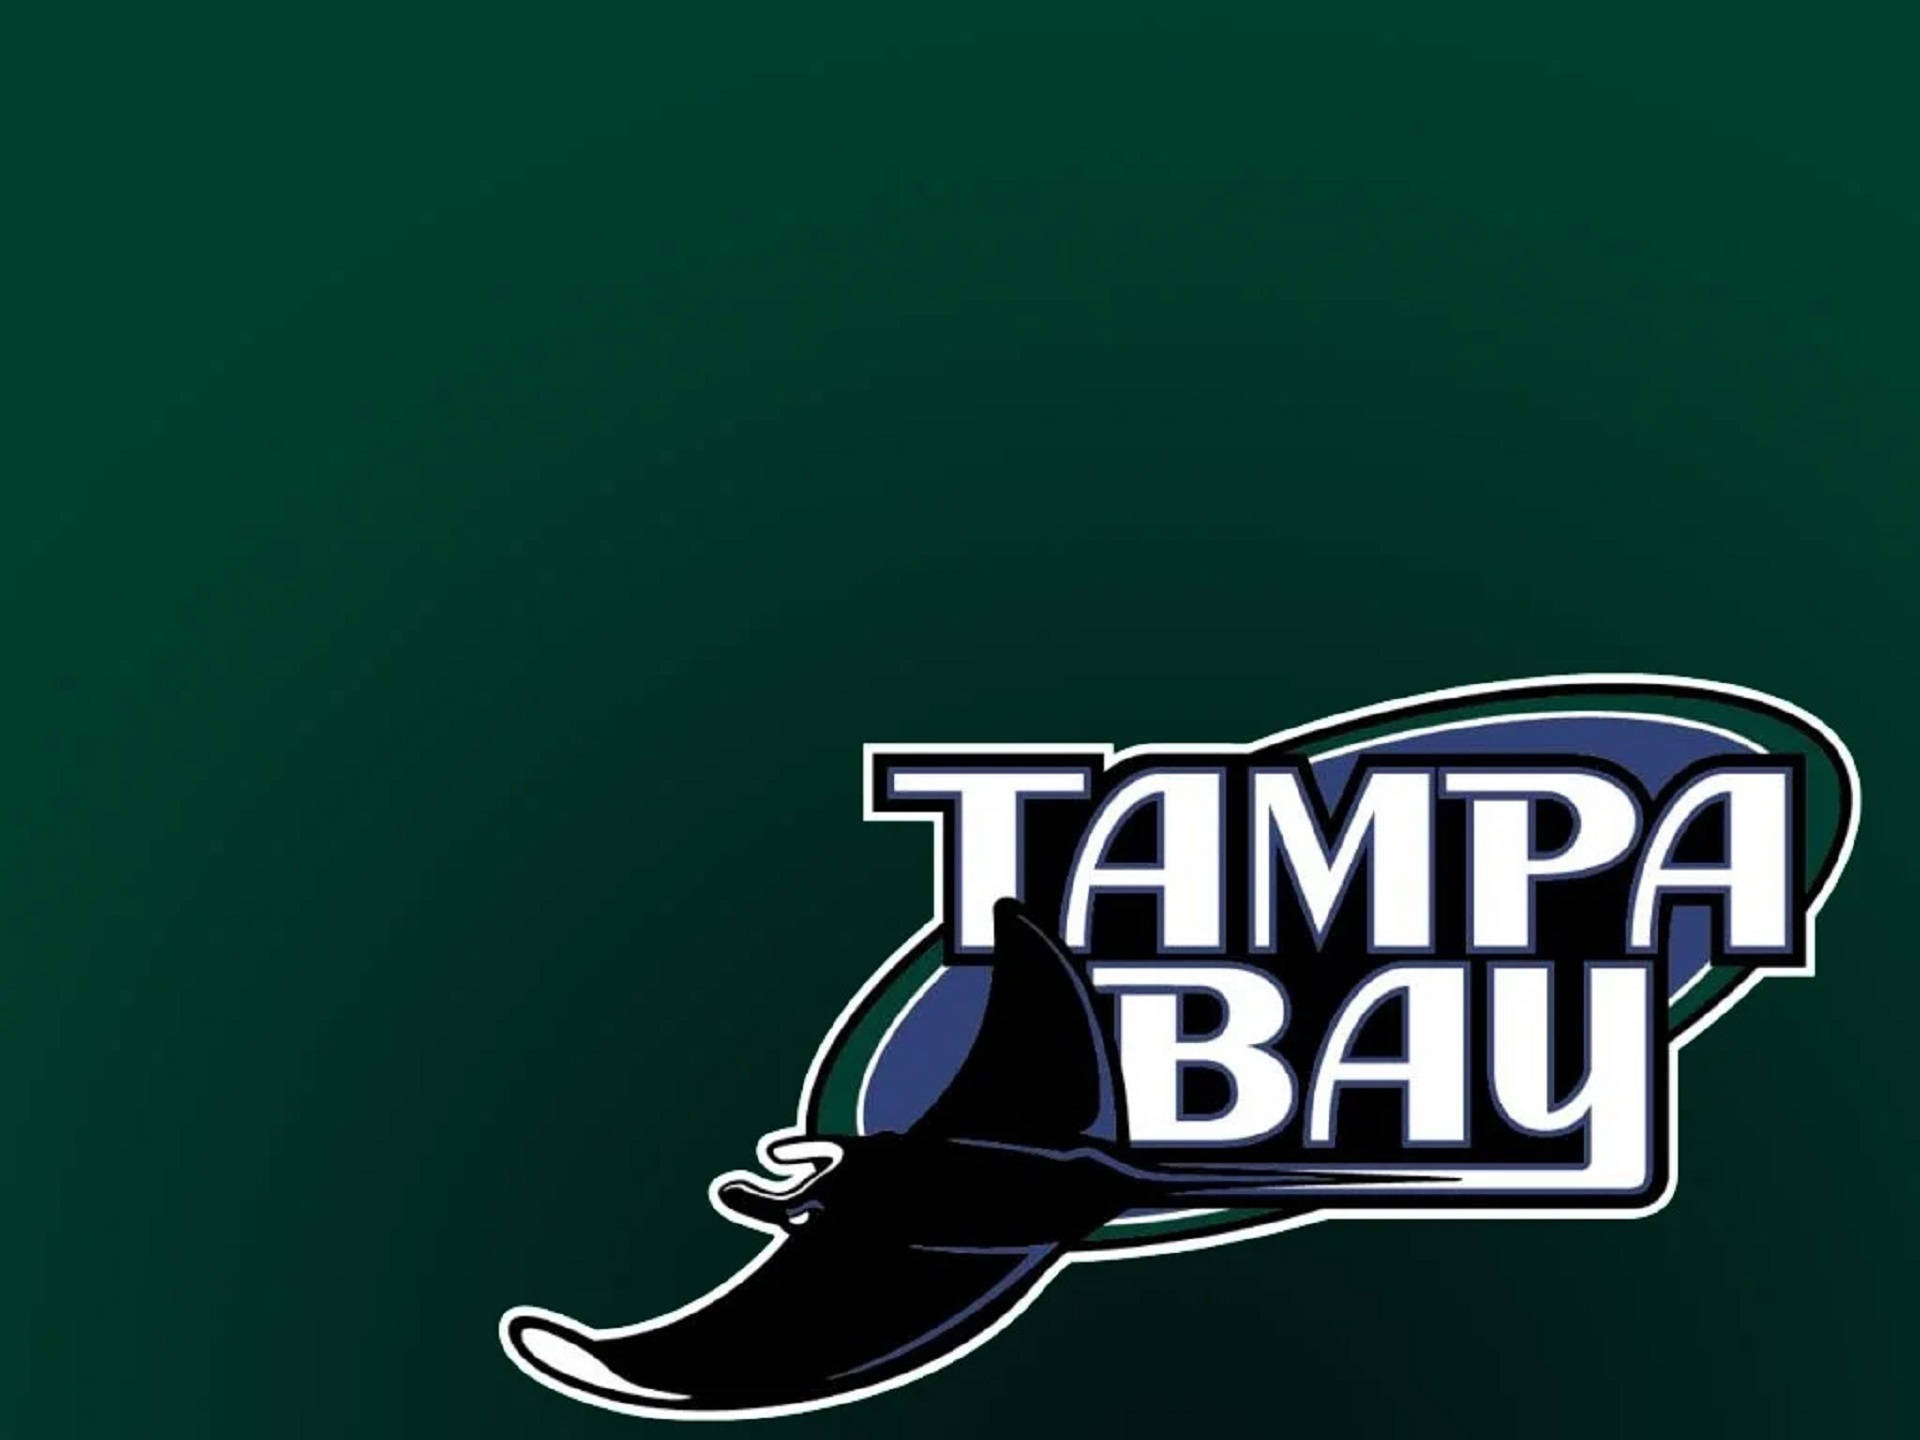 Tampa Bay Rays Wallpapers